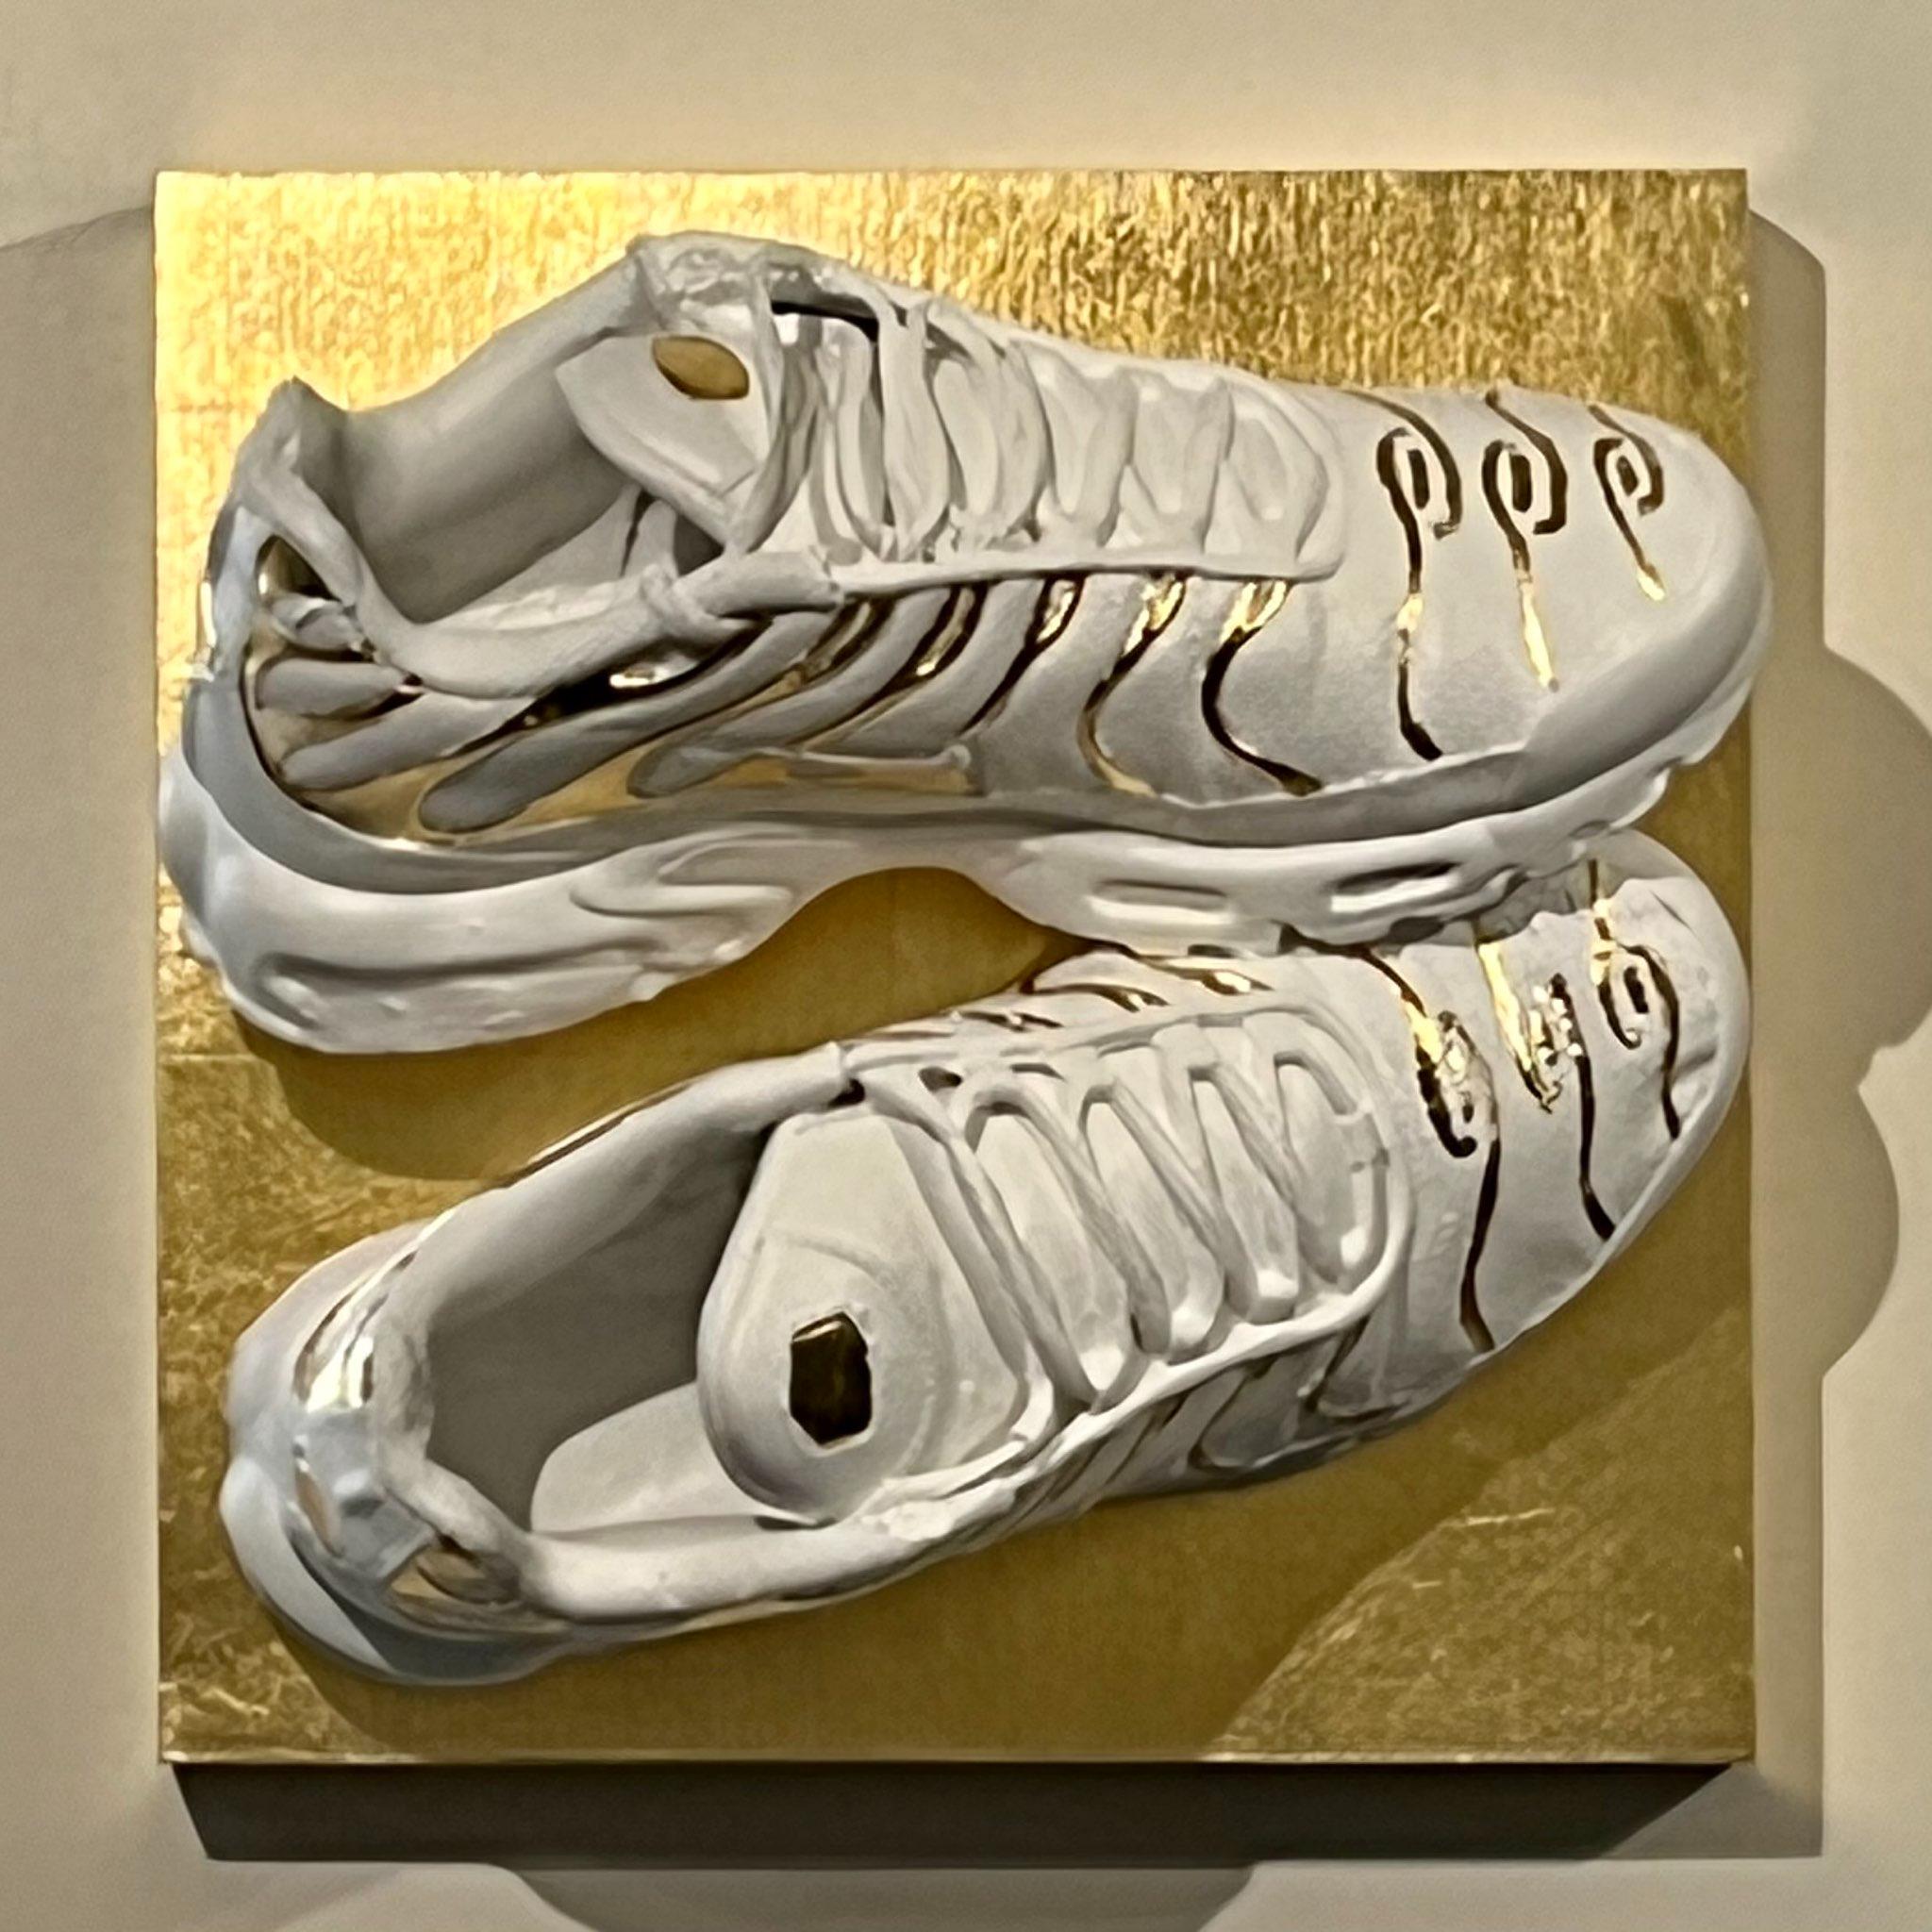 GOLDEN CAGE</br>Acrylic and gold leaf on Nike Air Max Tuned, wooden box 30 X 30 X 20 SD